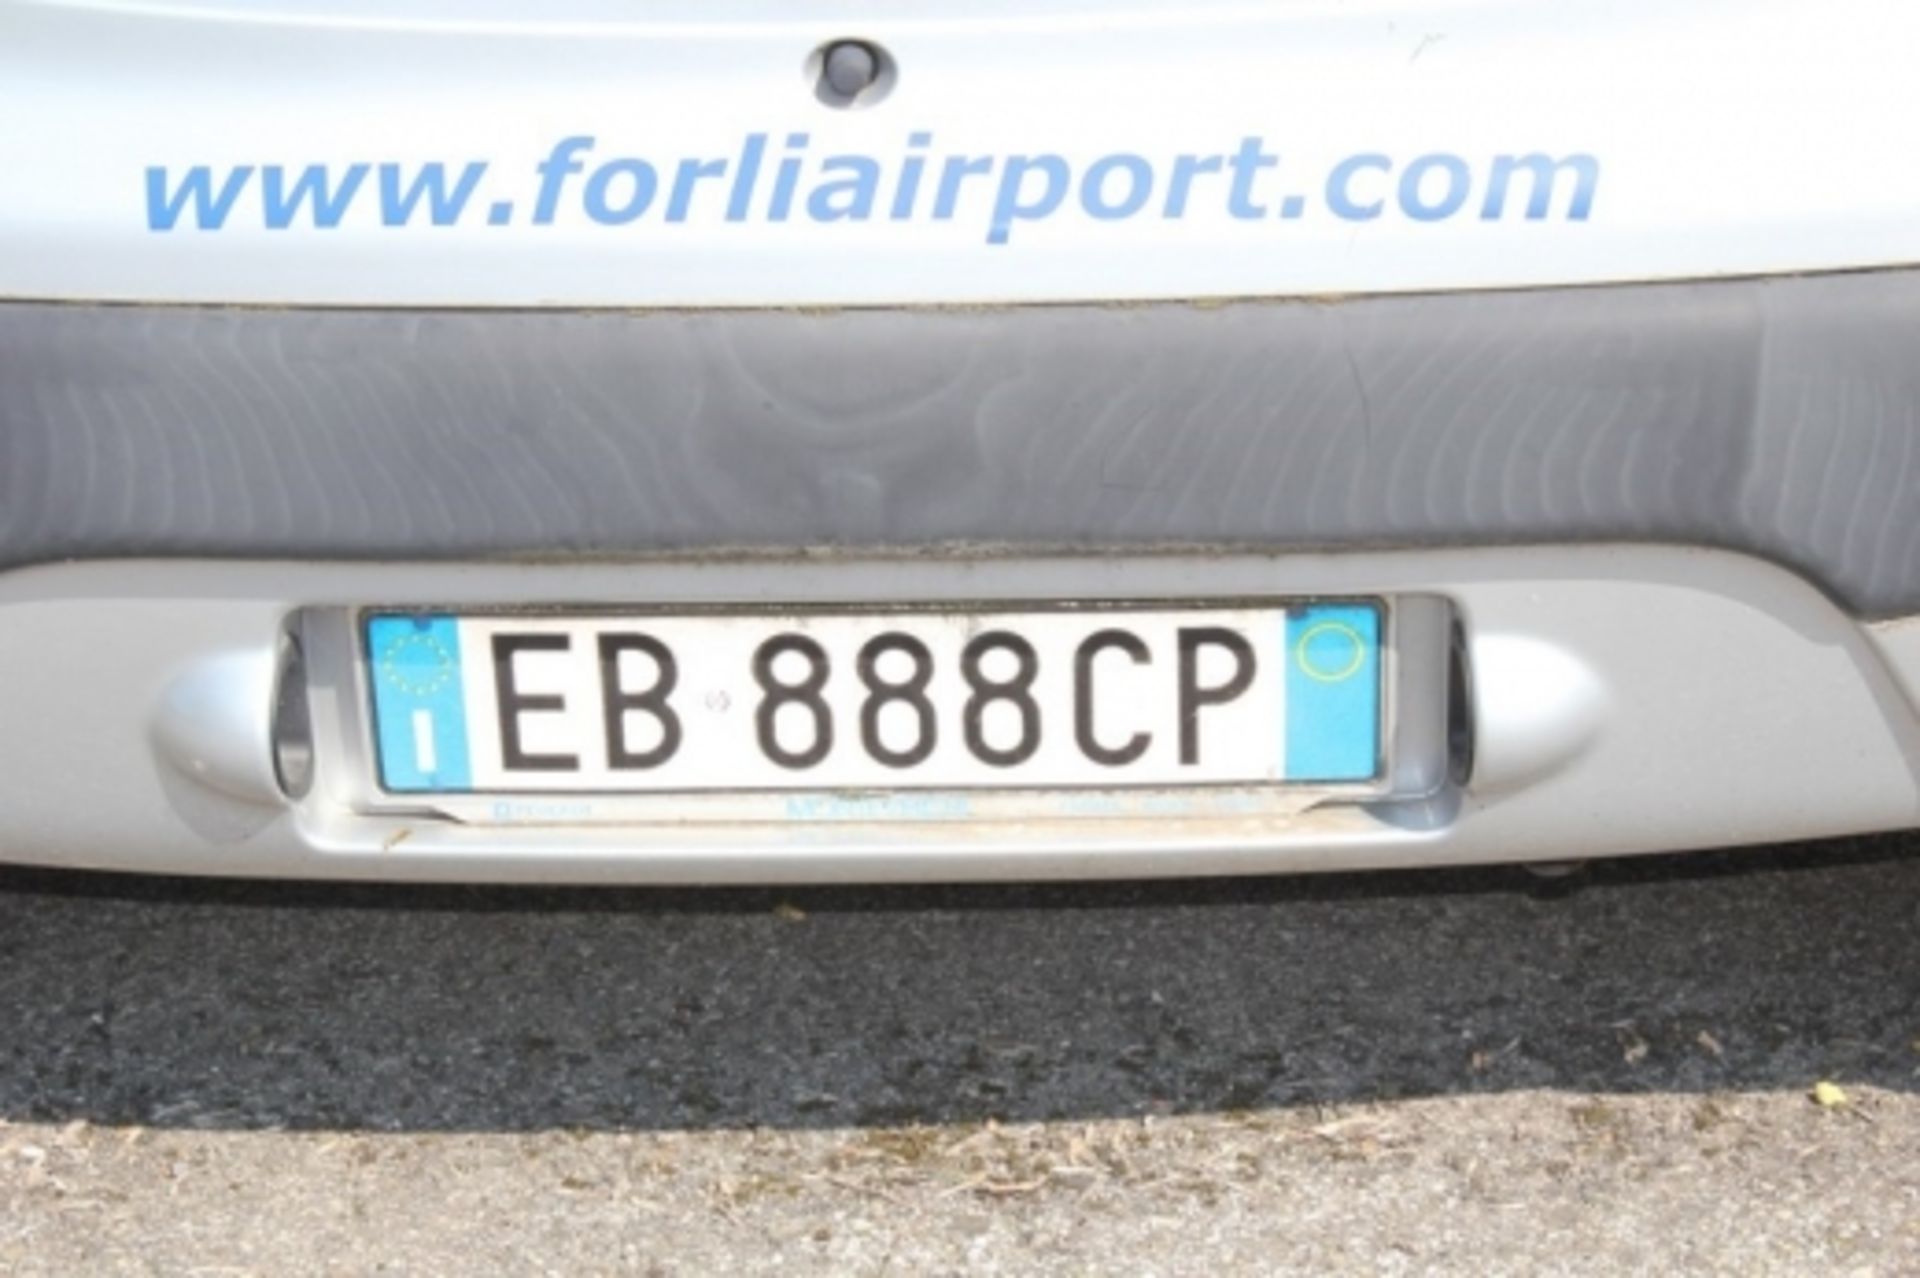 1,Peugeot 107 Plate:EB888CP color: white, gasoline engine, mileage: 16.316 km, body: various dents - Image 2 of 4